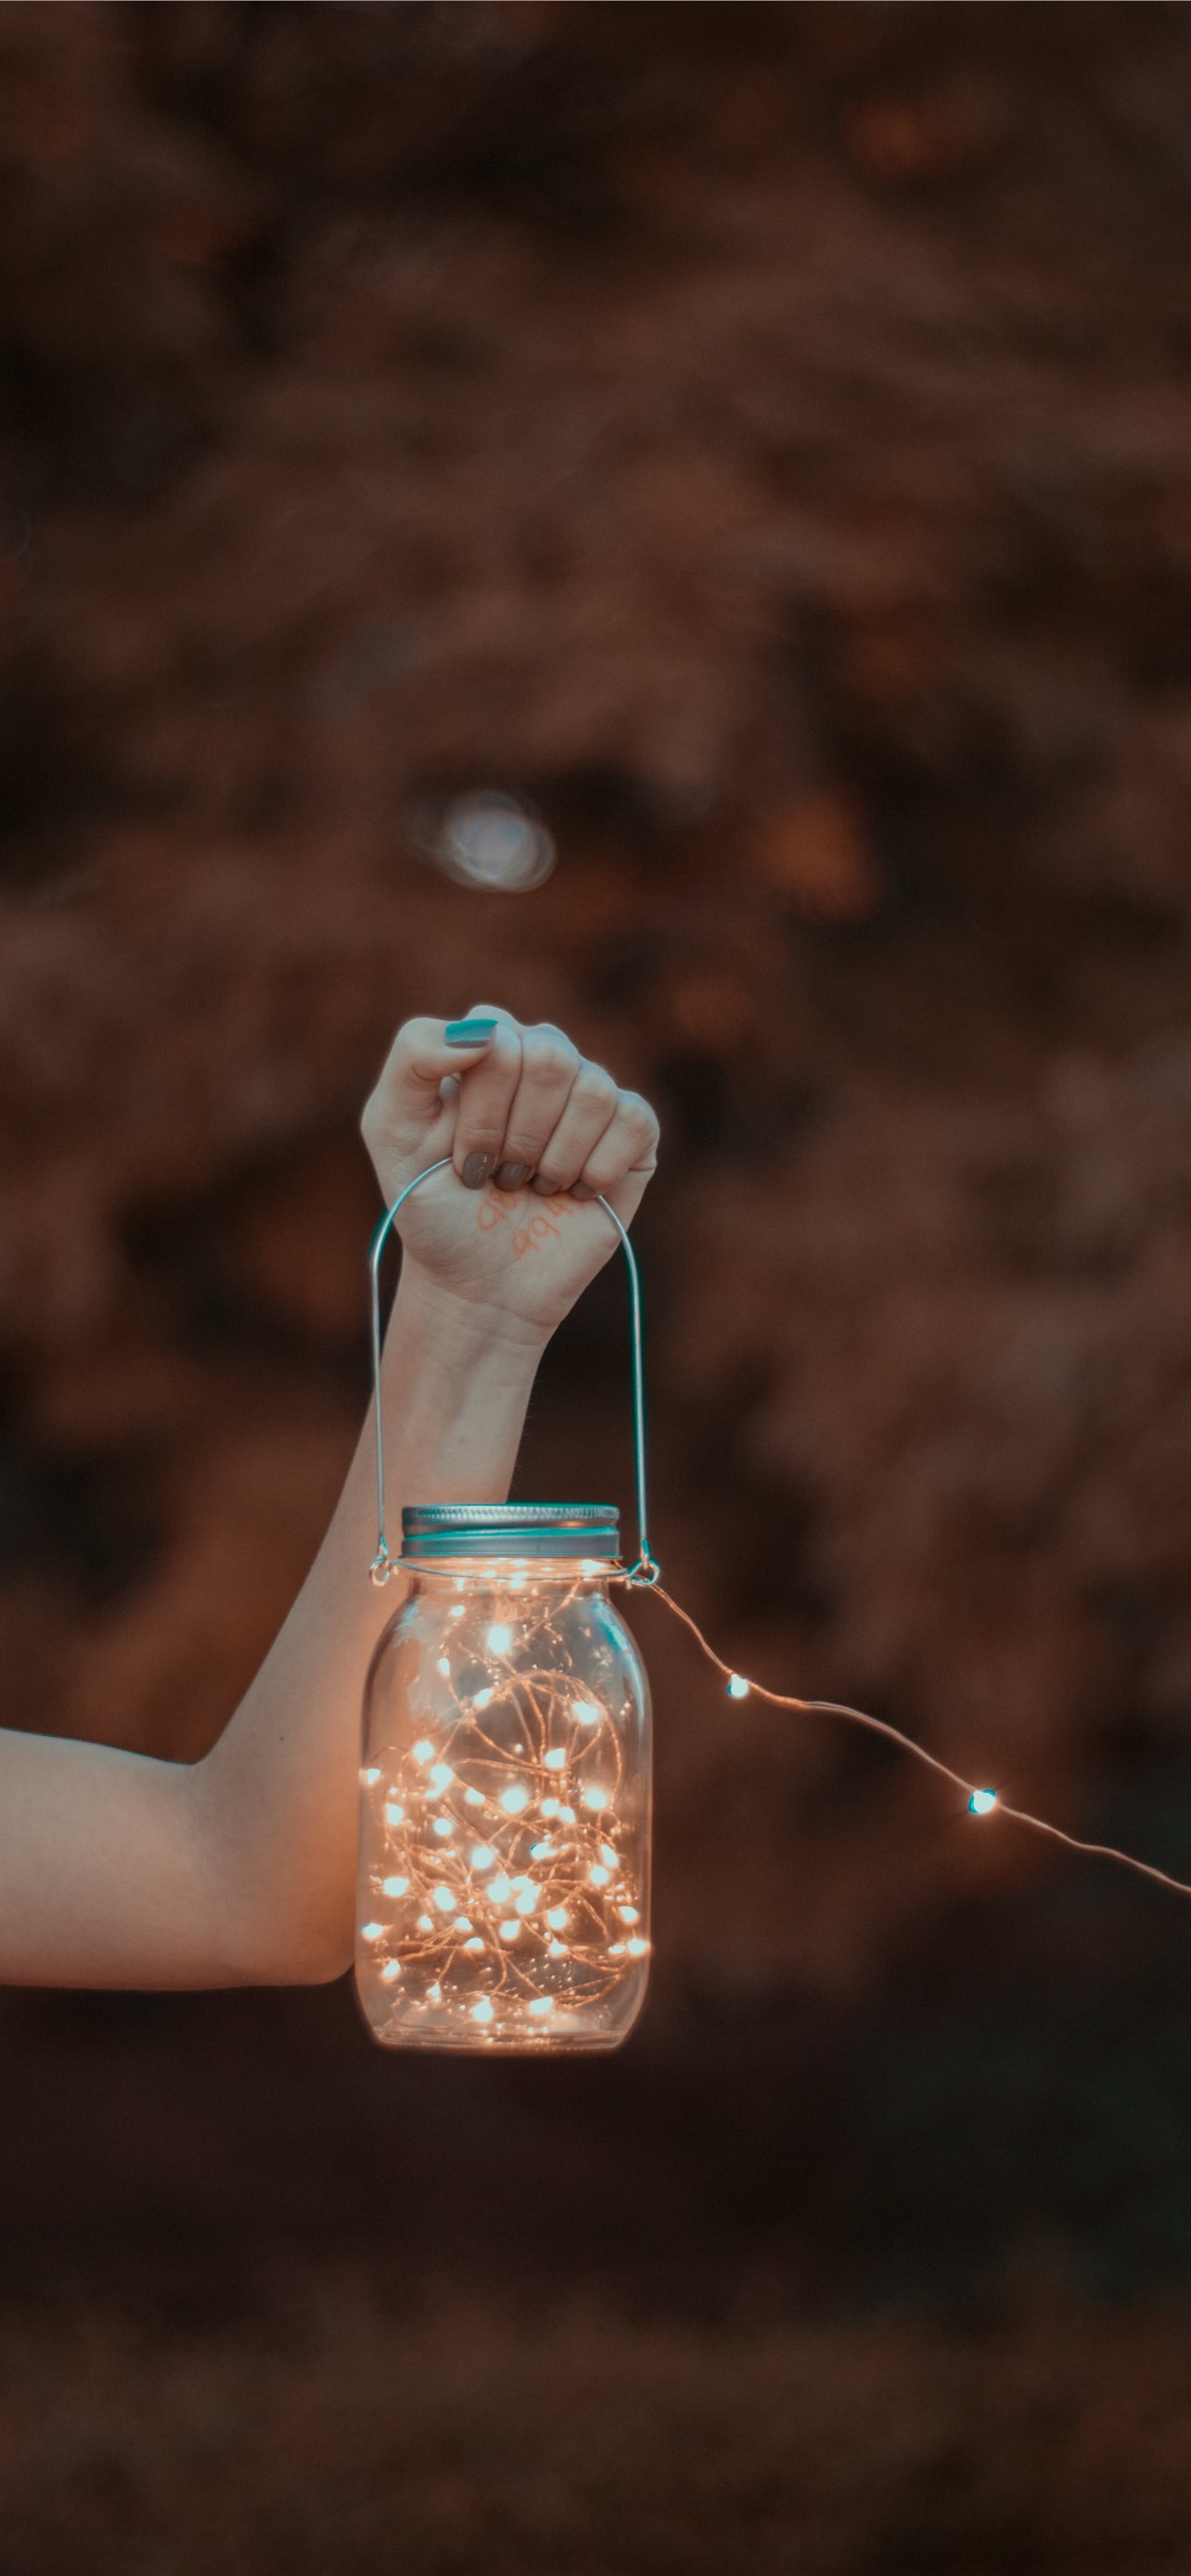 Person Holding Mason Jar With String Lights Iphone Wallpapers Free Download